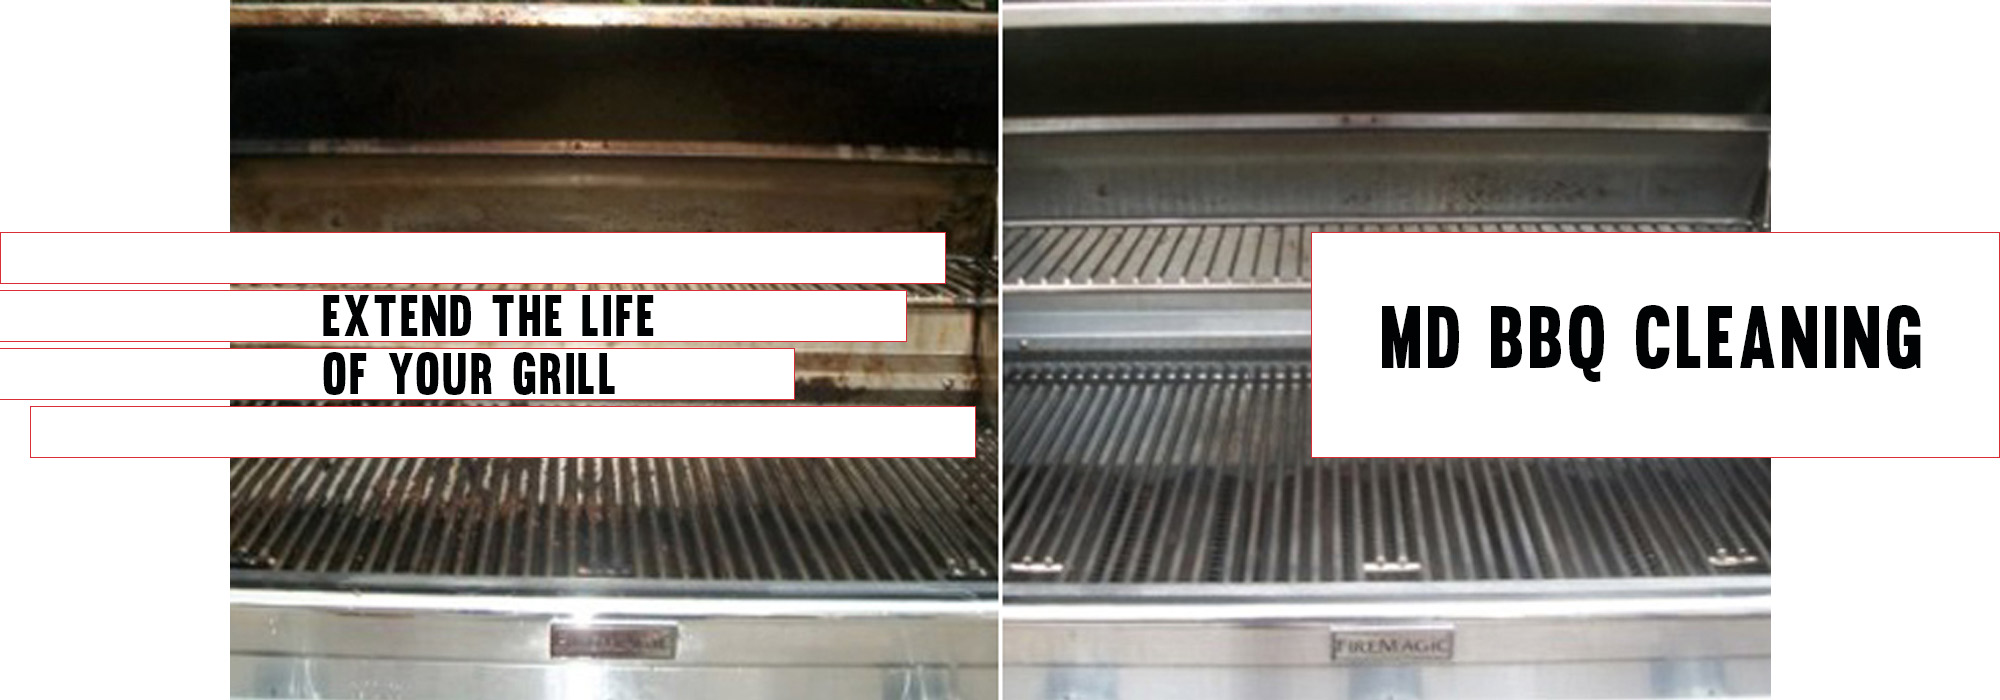 Extend the life of your grill